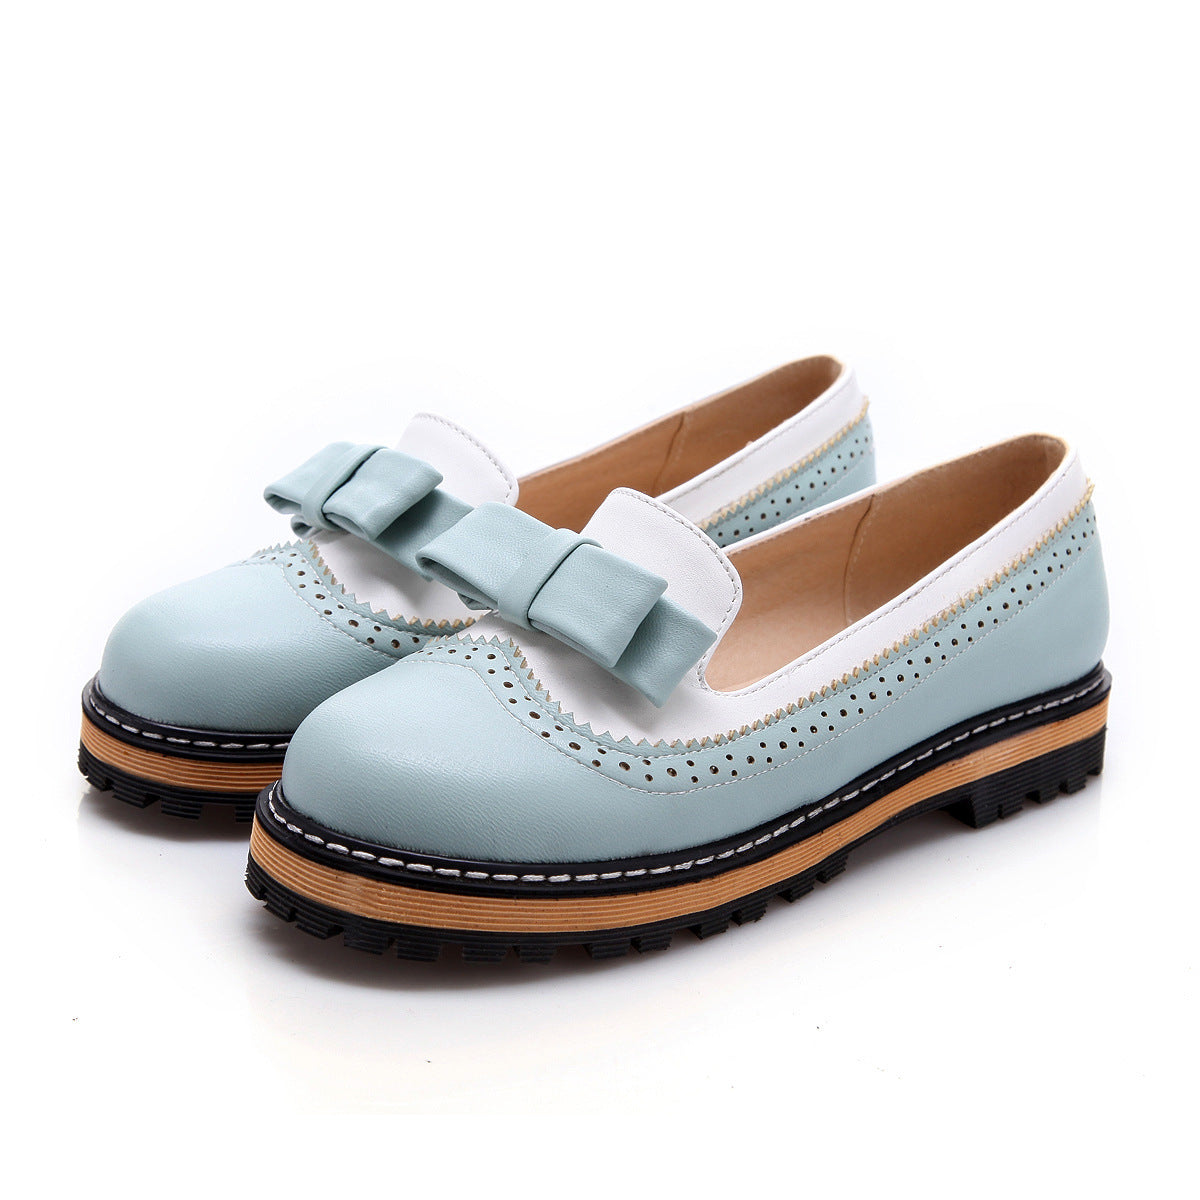 Girls Sweet Bow Color Matching Flat Shoes